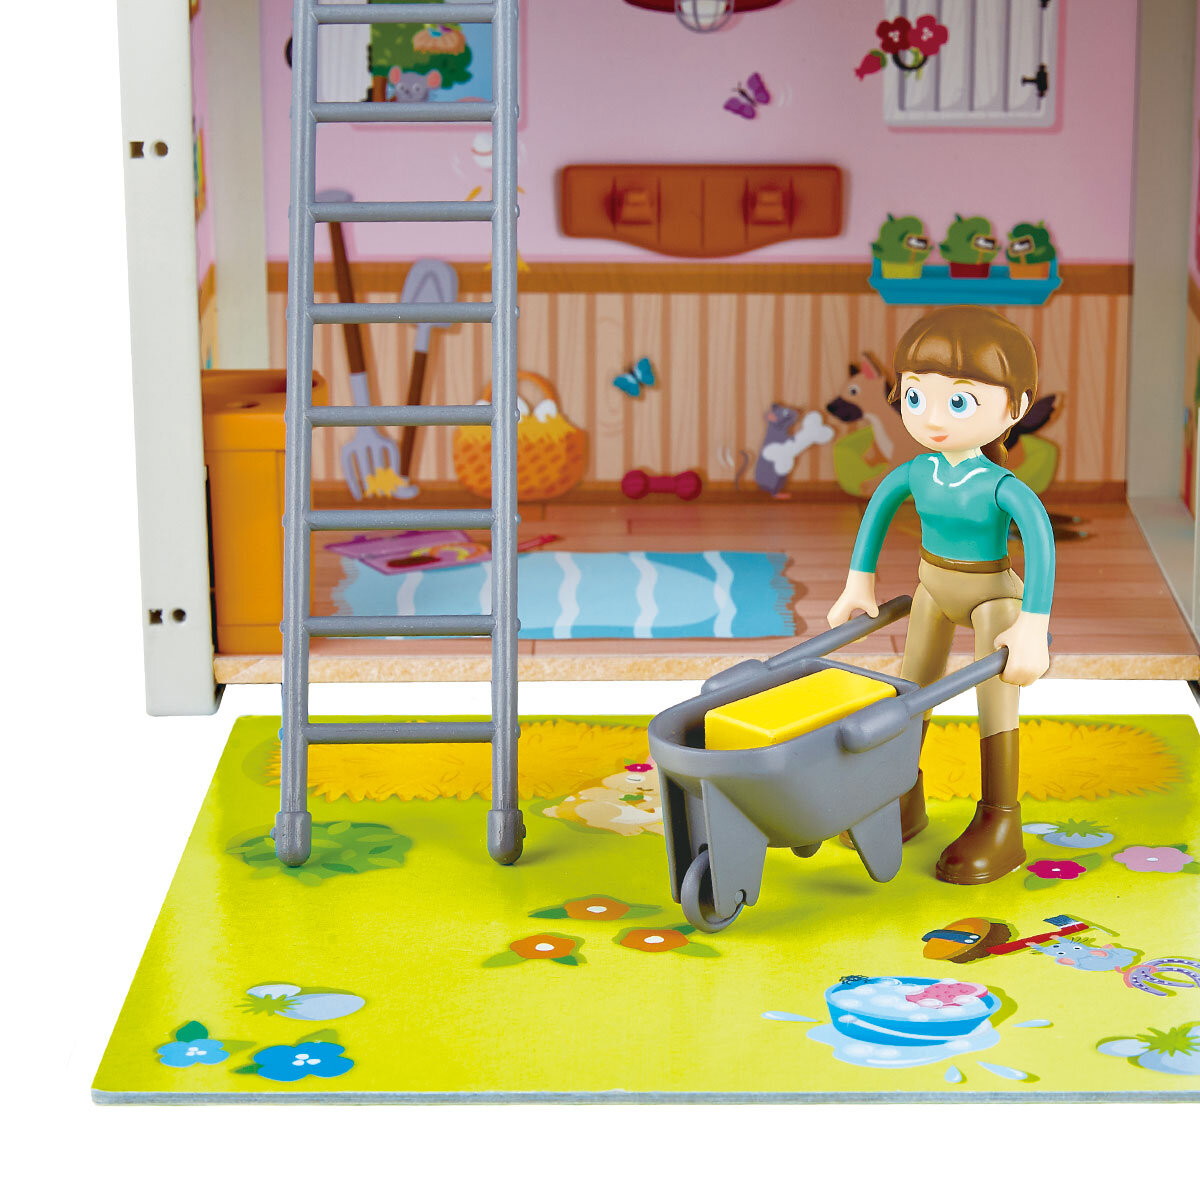 Buy Hape Pony Club Ranch Feature2 Image at Costco.co.uk